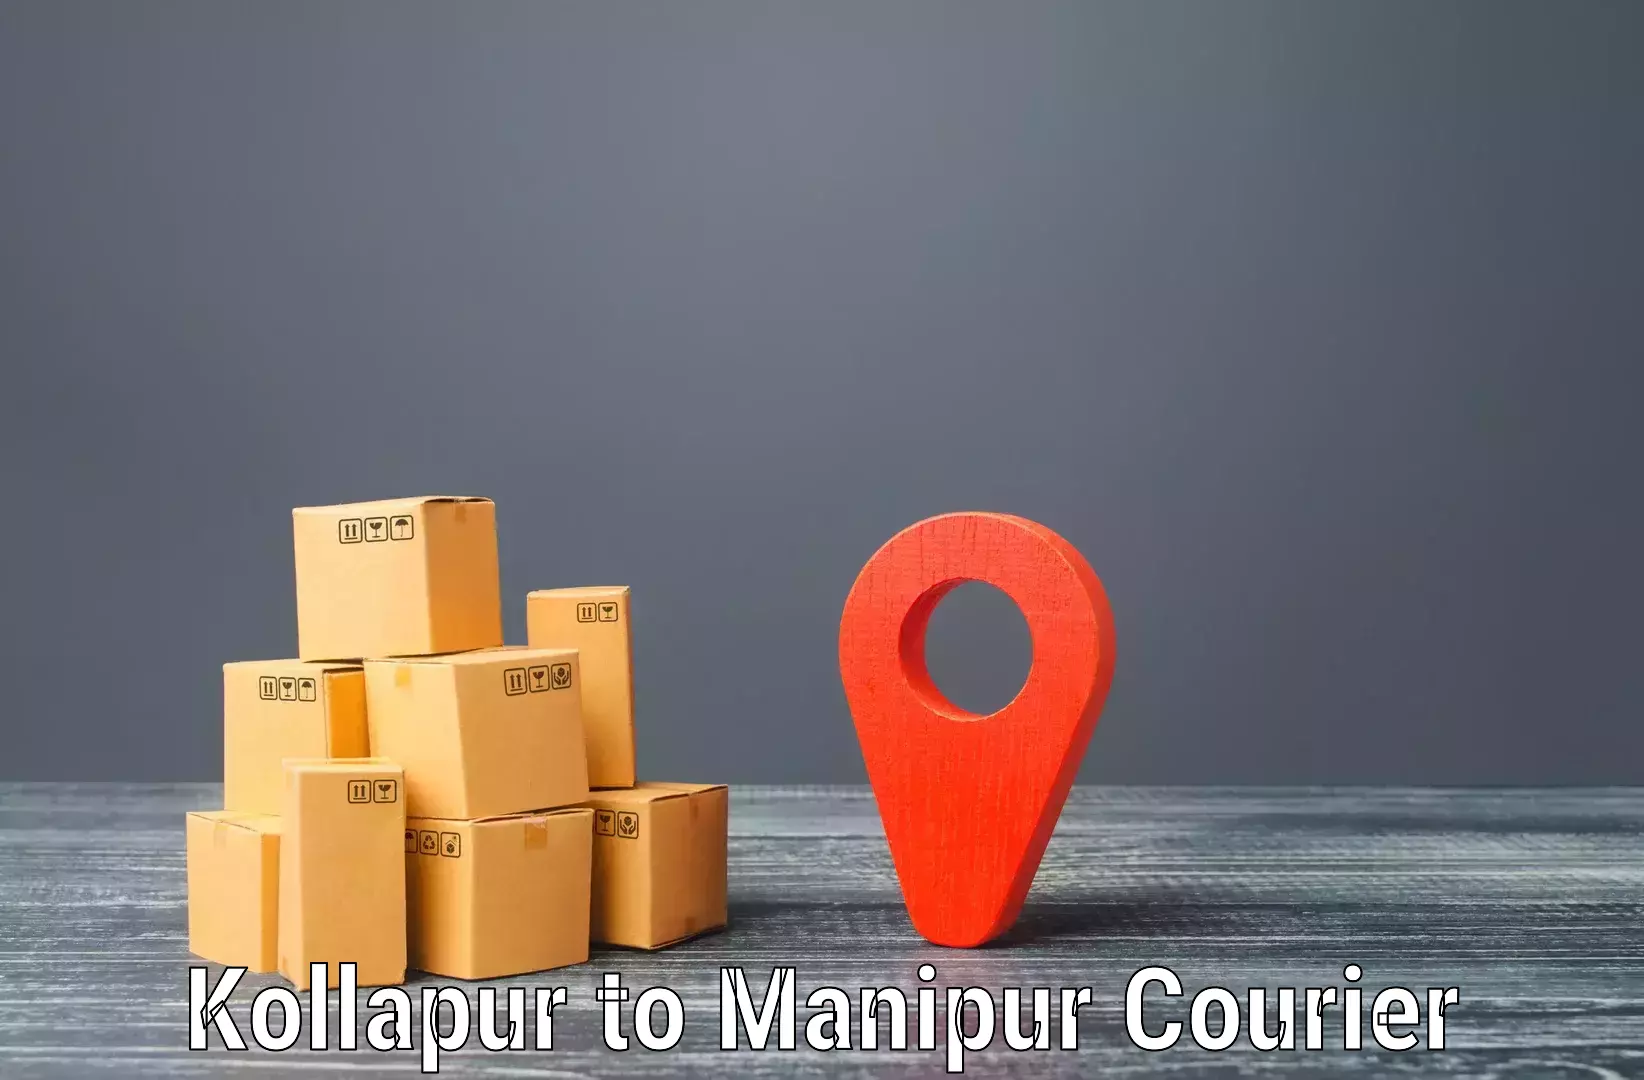 Next day courier Kollapur to Chandel